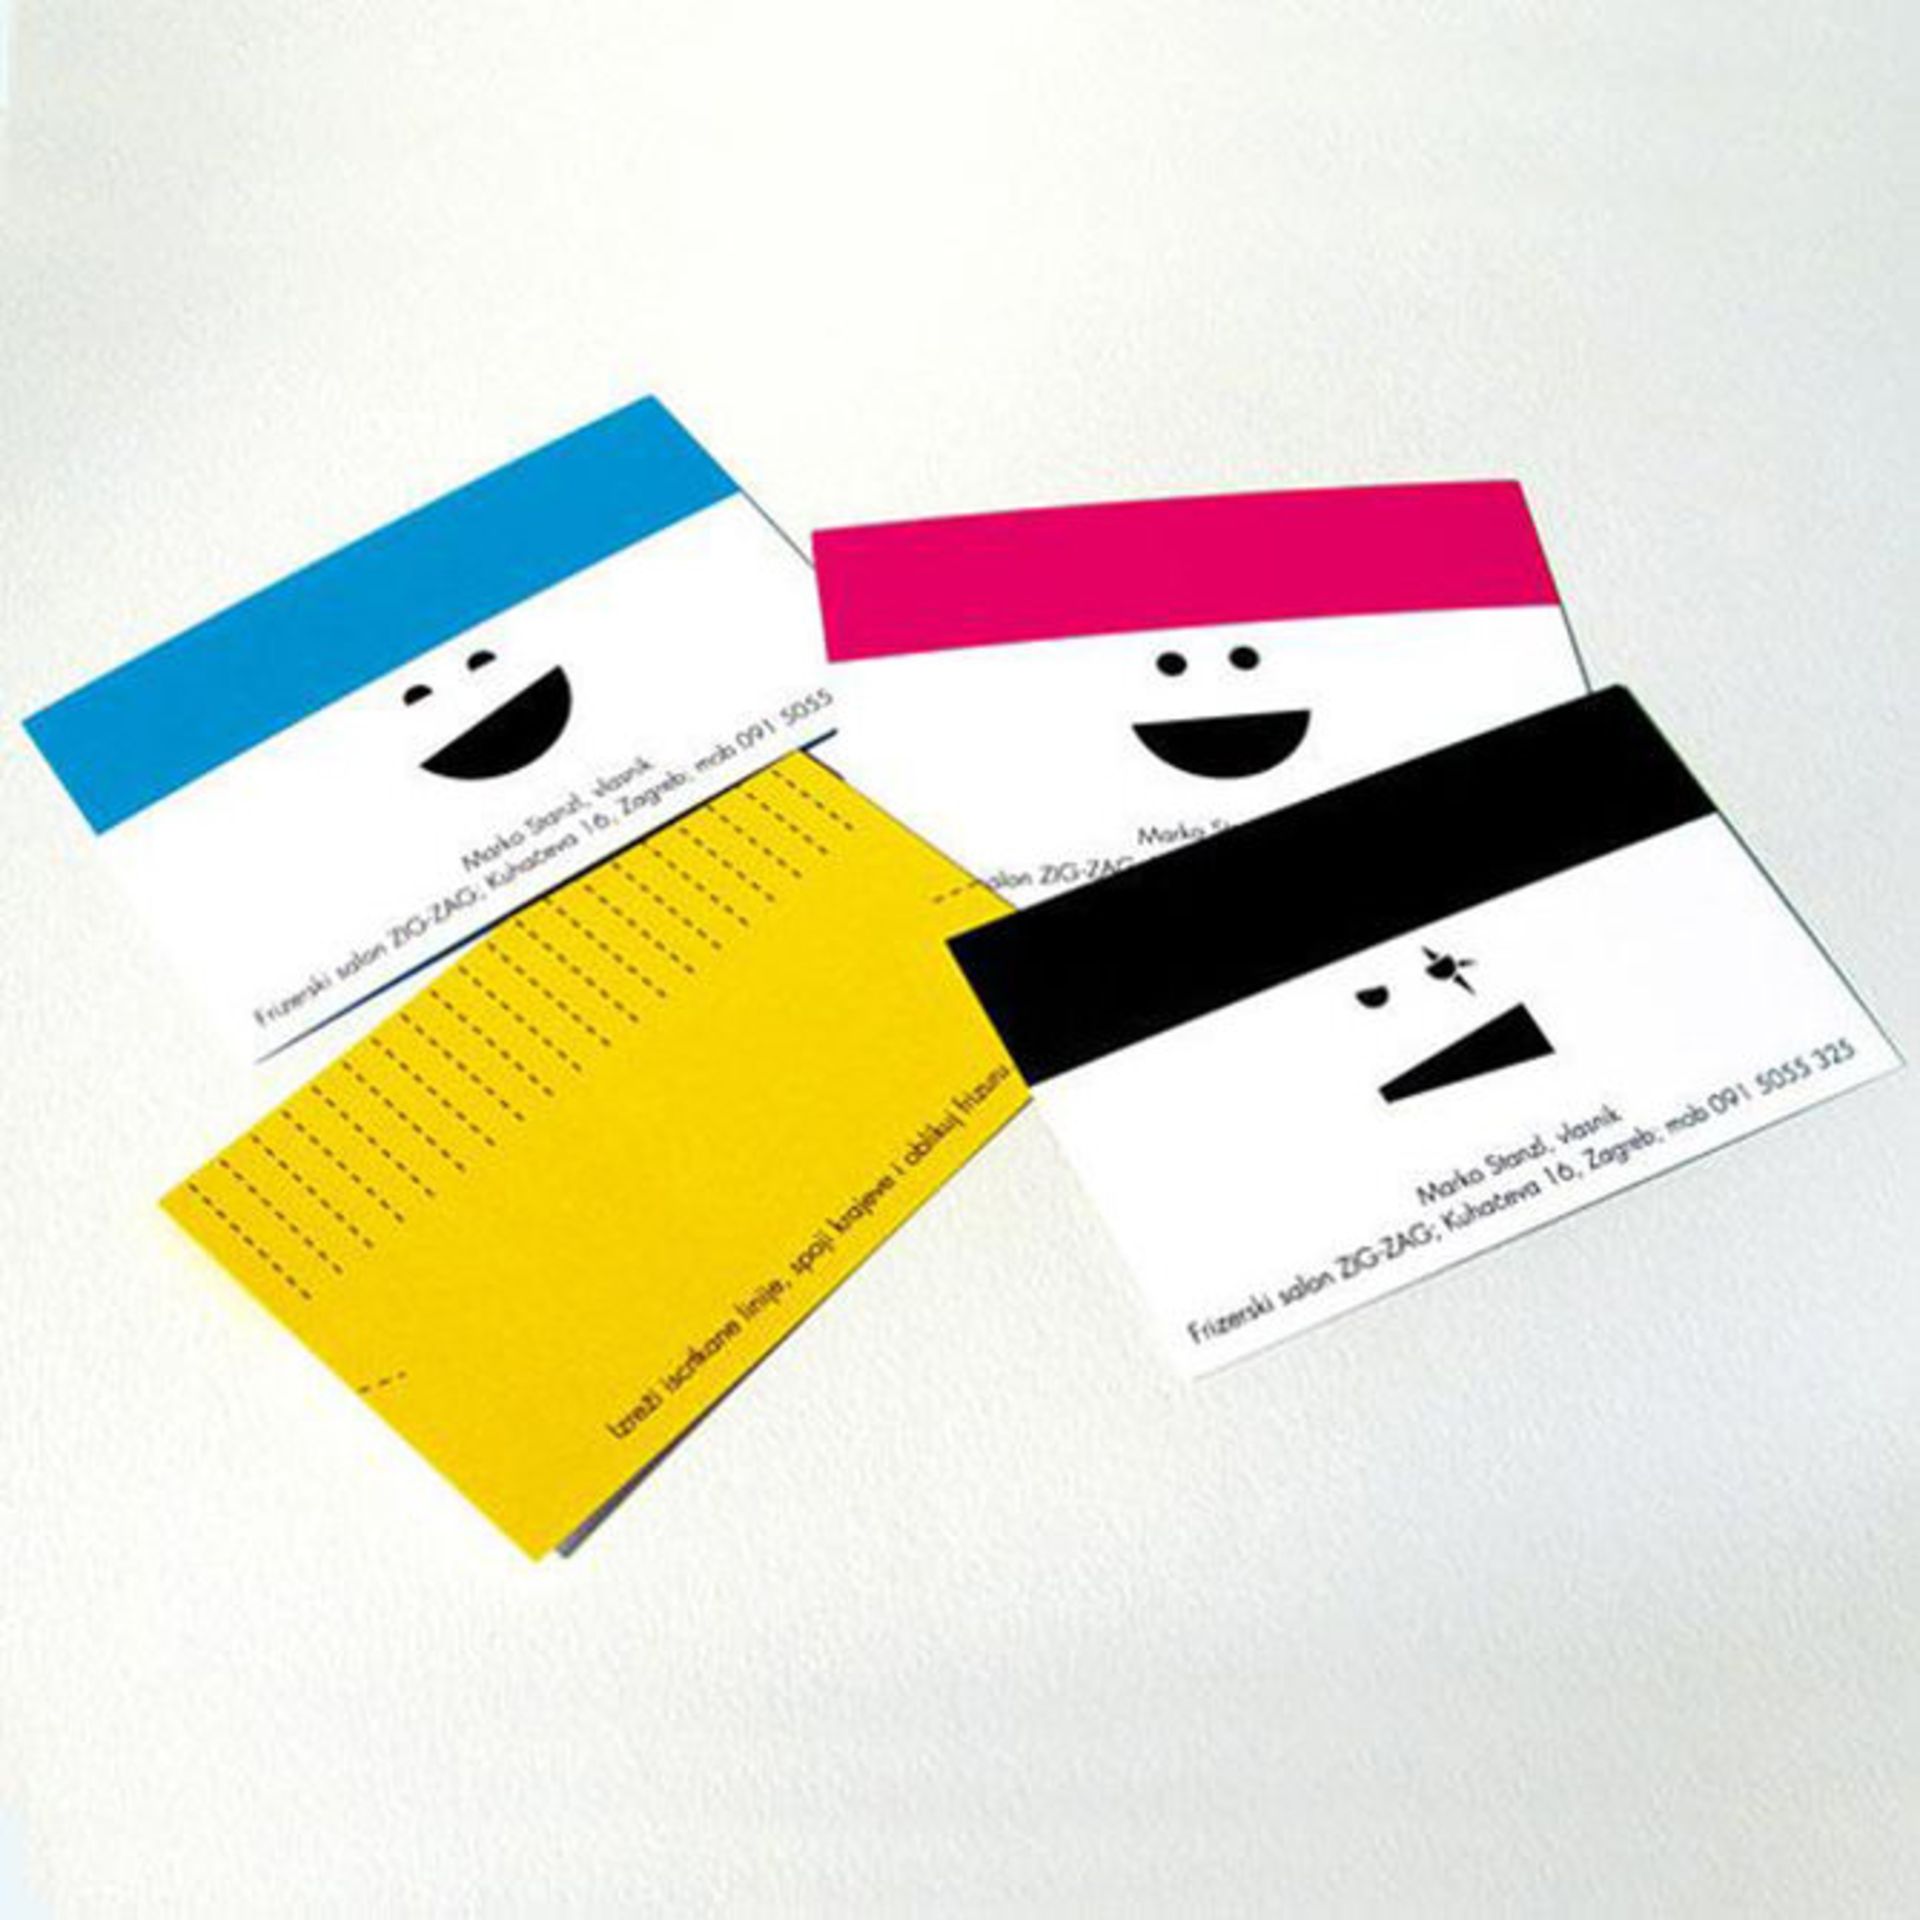 creative-business-cards-10-1